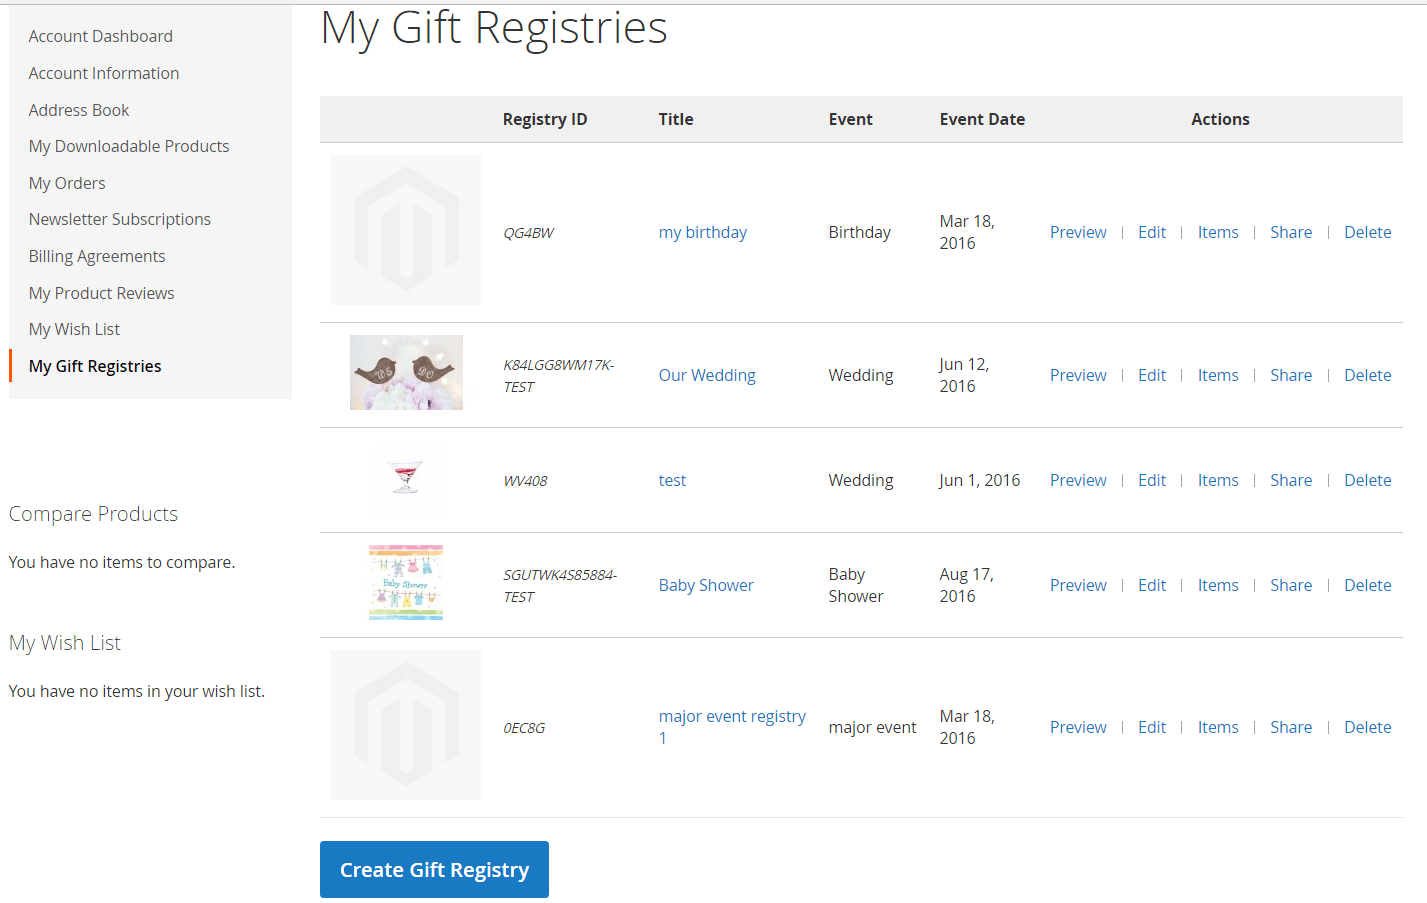 Customer Interface of Gift Registry Extension